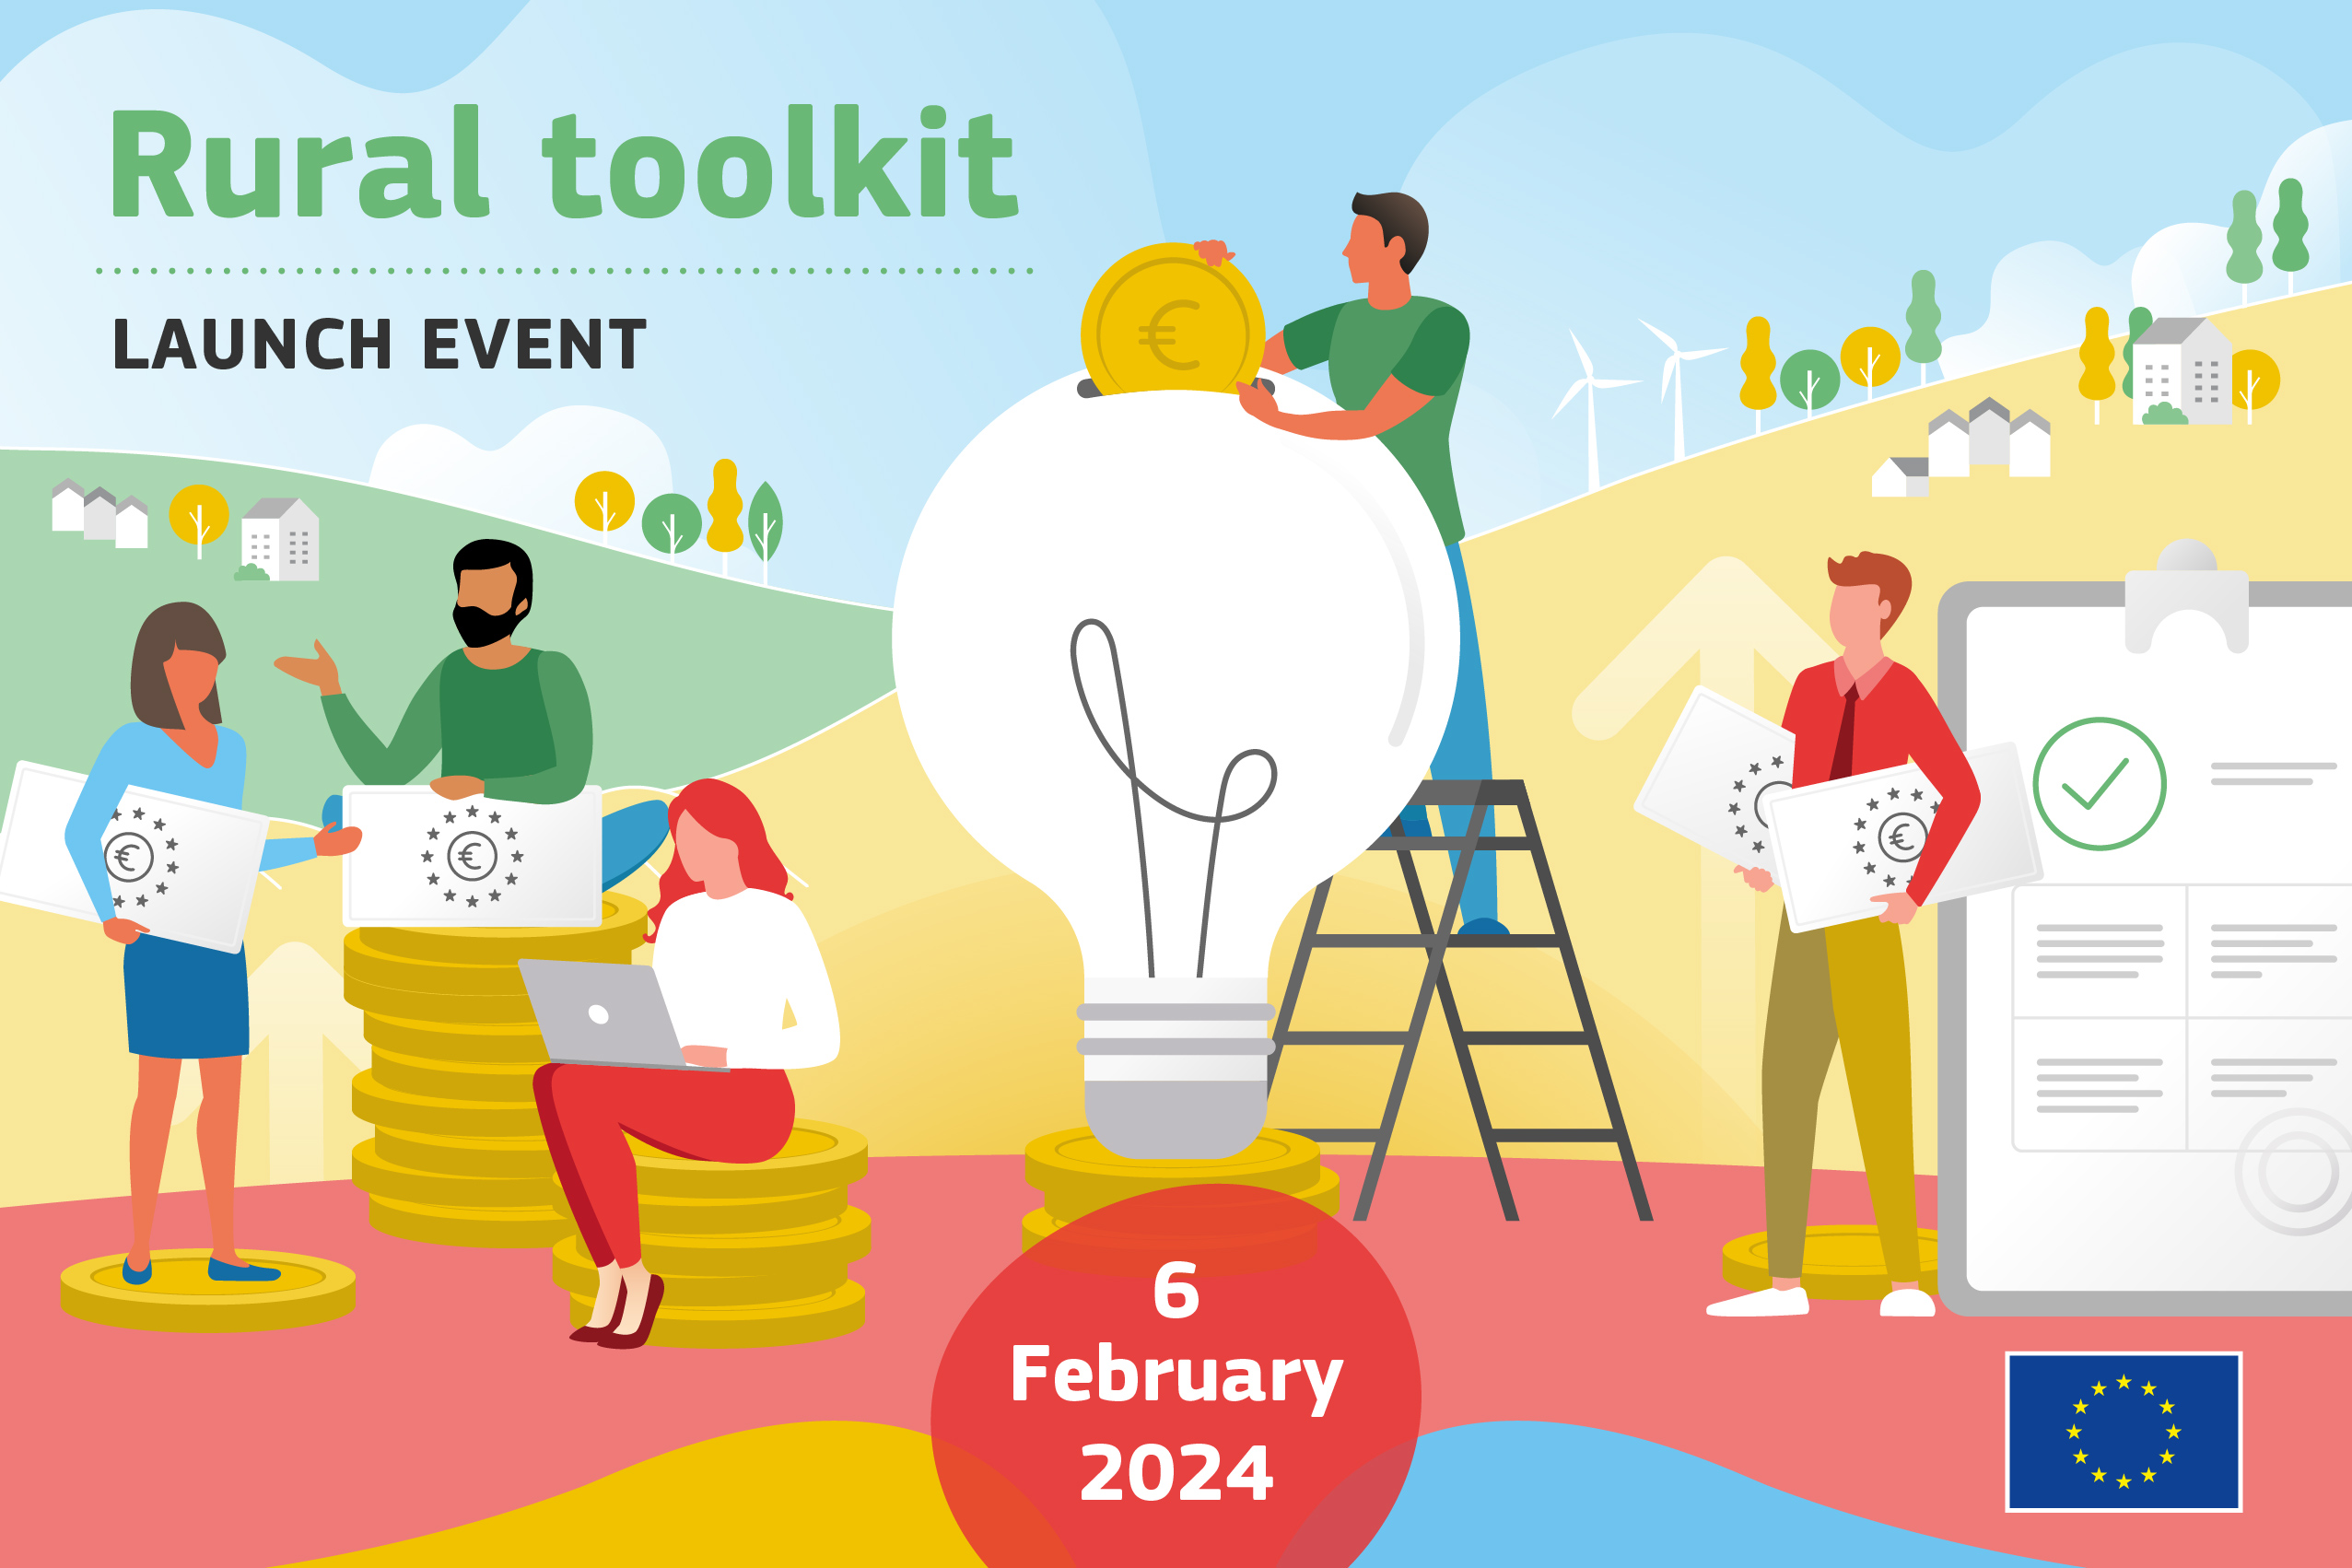 Join the Rural Toolkit launch event